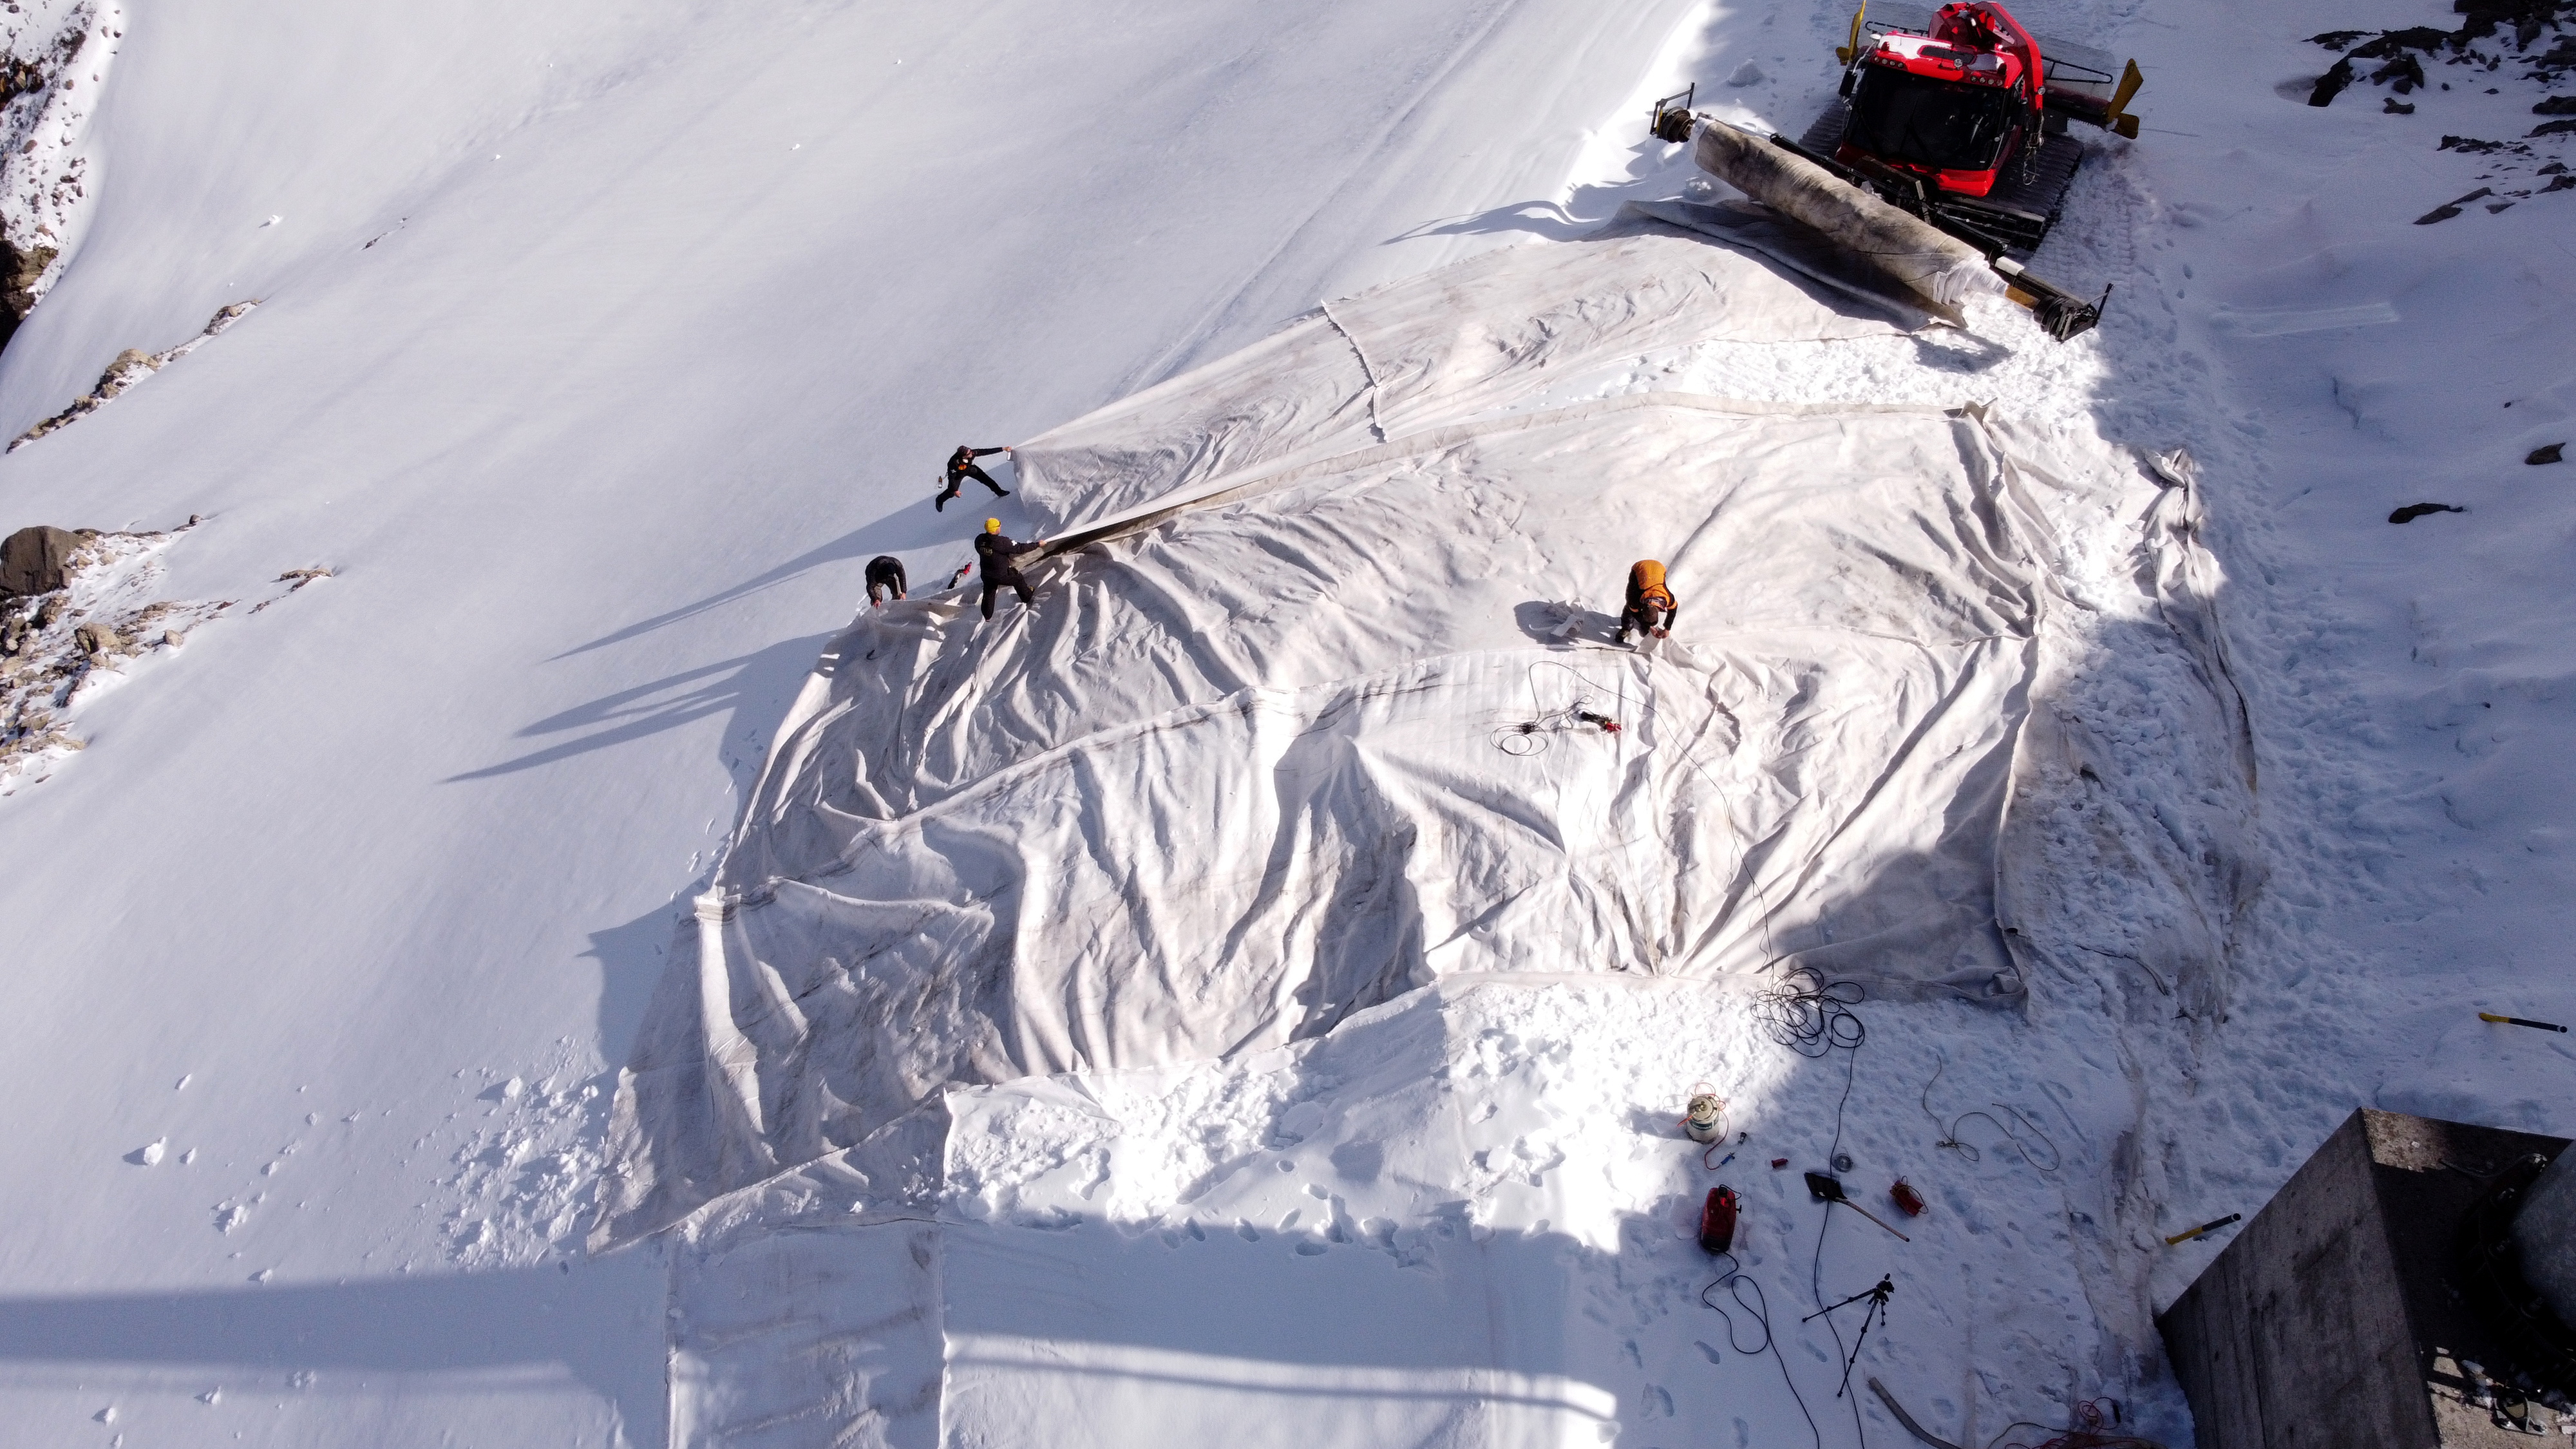 Protection of the glacier on Mount Titlis near Engelberg